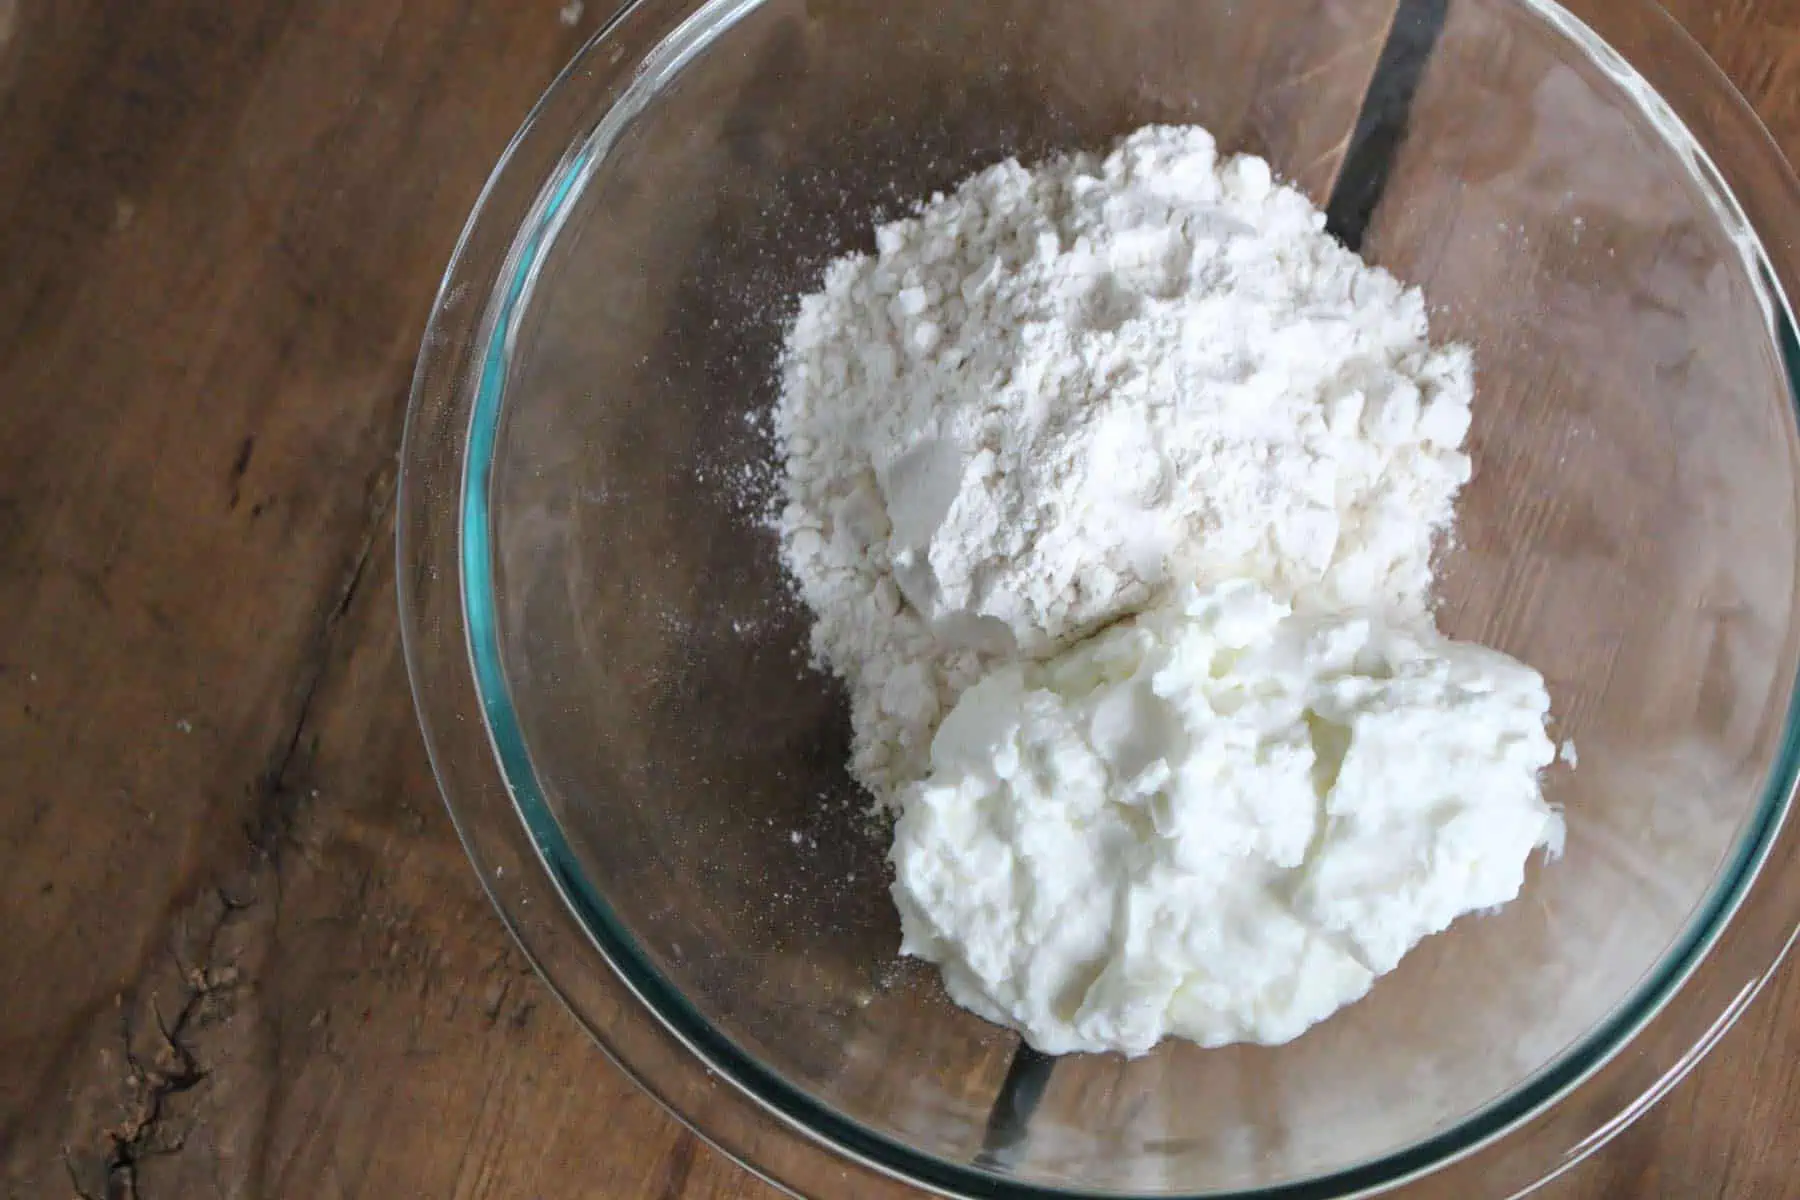 Flour and yogurt in glass mixing bowl.